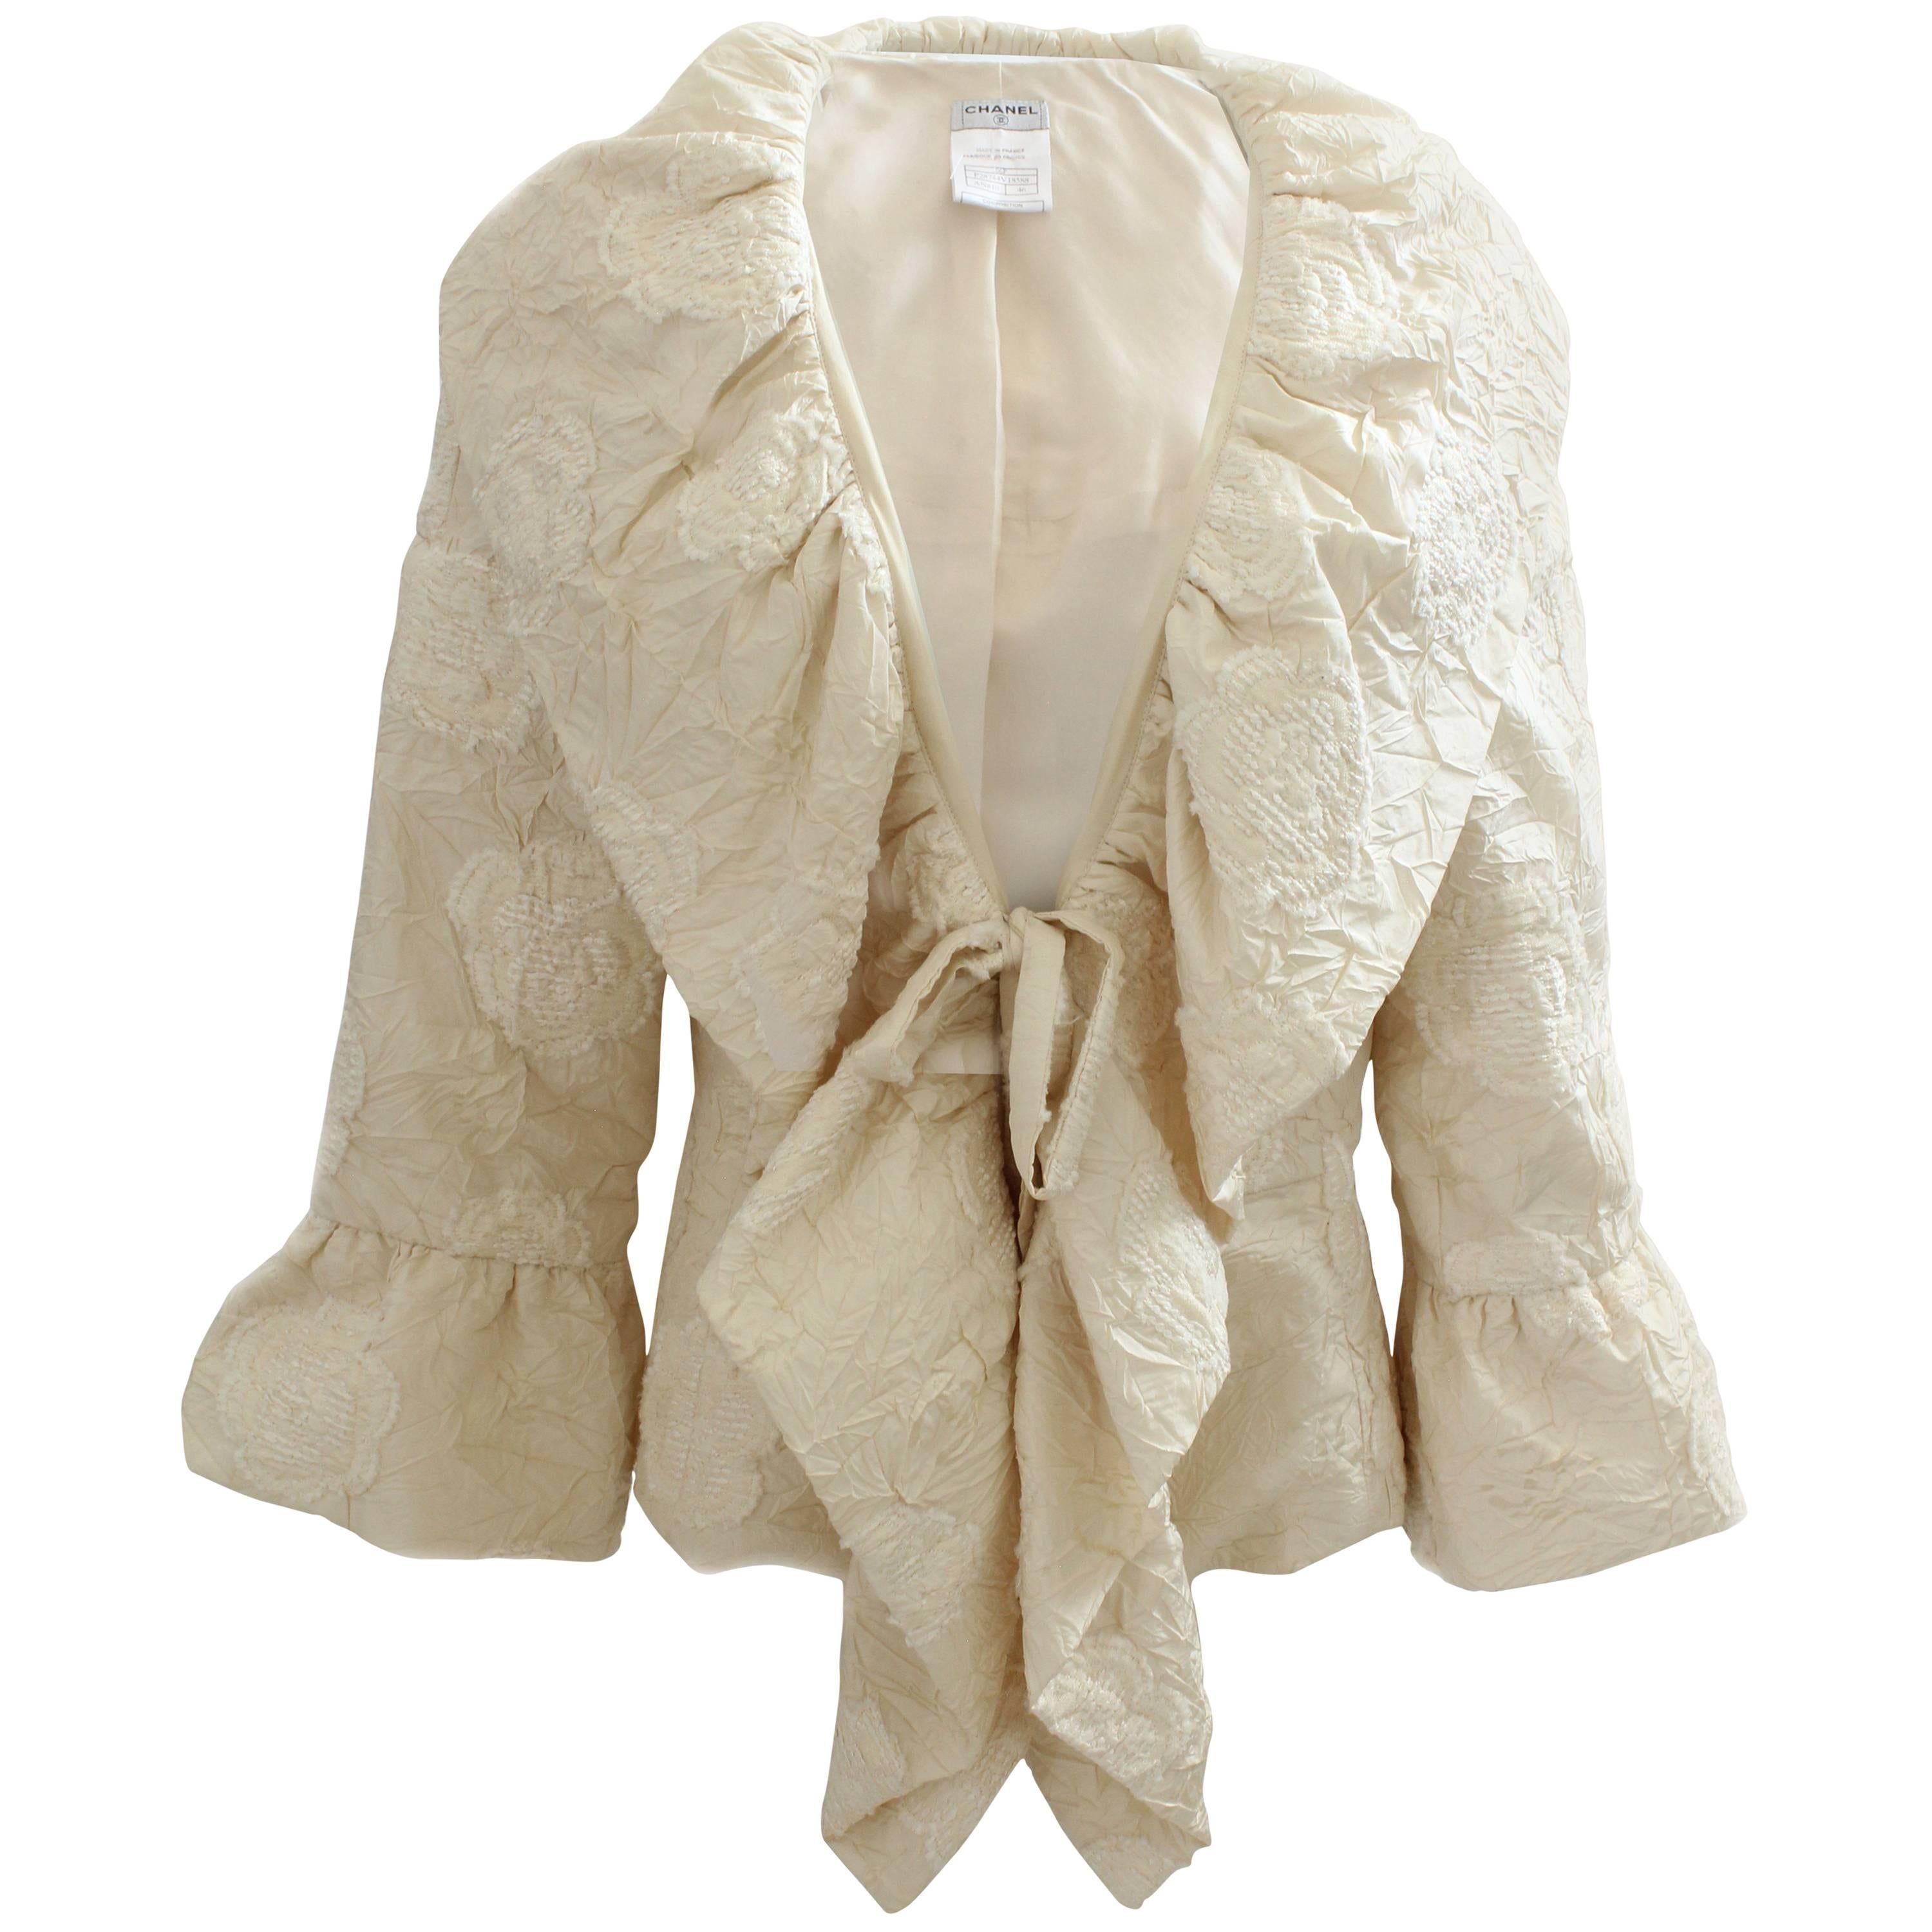 Chanel Camellia Jacket with Bell Ruffle Sleeves Cream Ivory Silk Jacquard 06P 46